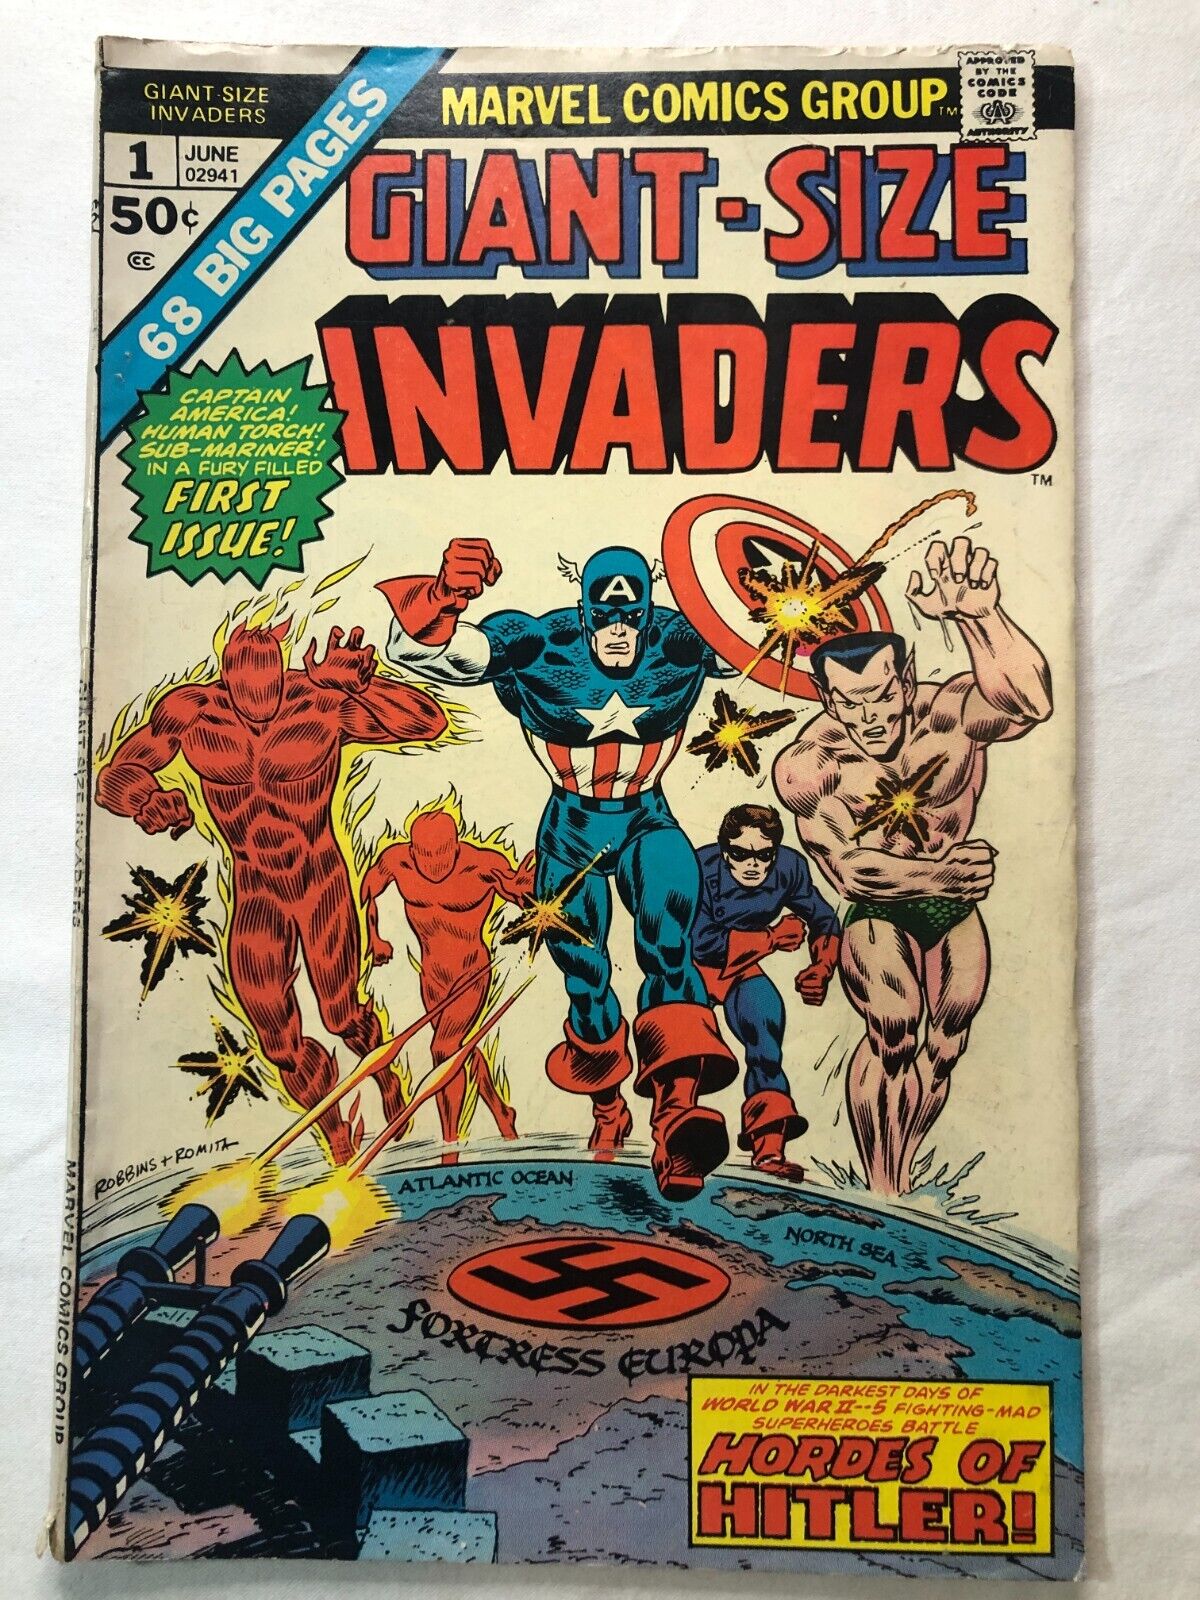 GIANT-SIZE INVADERS #1 Classic Bronze Age Marvel Comics Very Nice Condition